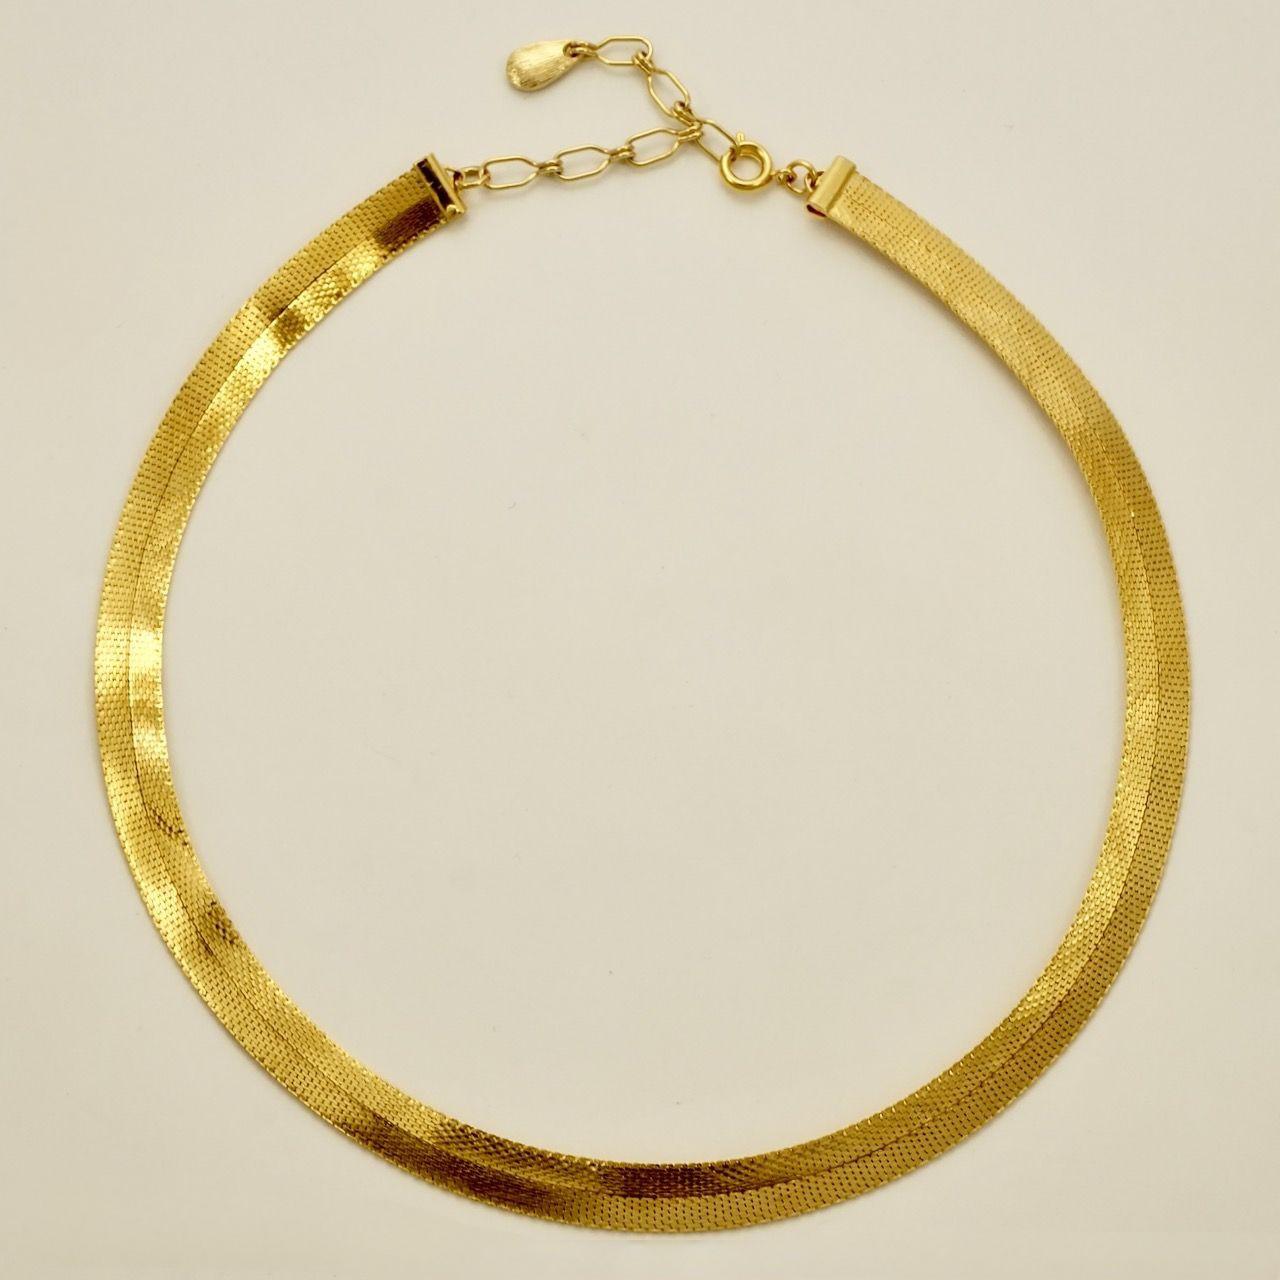 Gold Plated Swirl Design Egyptian Revival Mesh Collar Necklace circa 1980s In Excellent Condition For Sale In London, GB